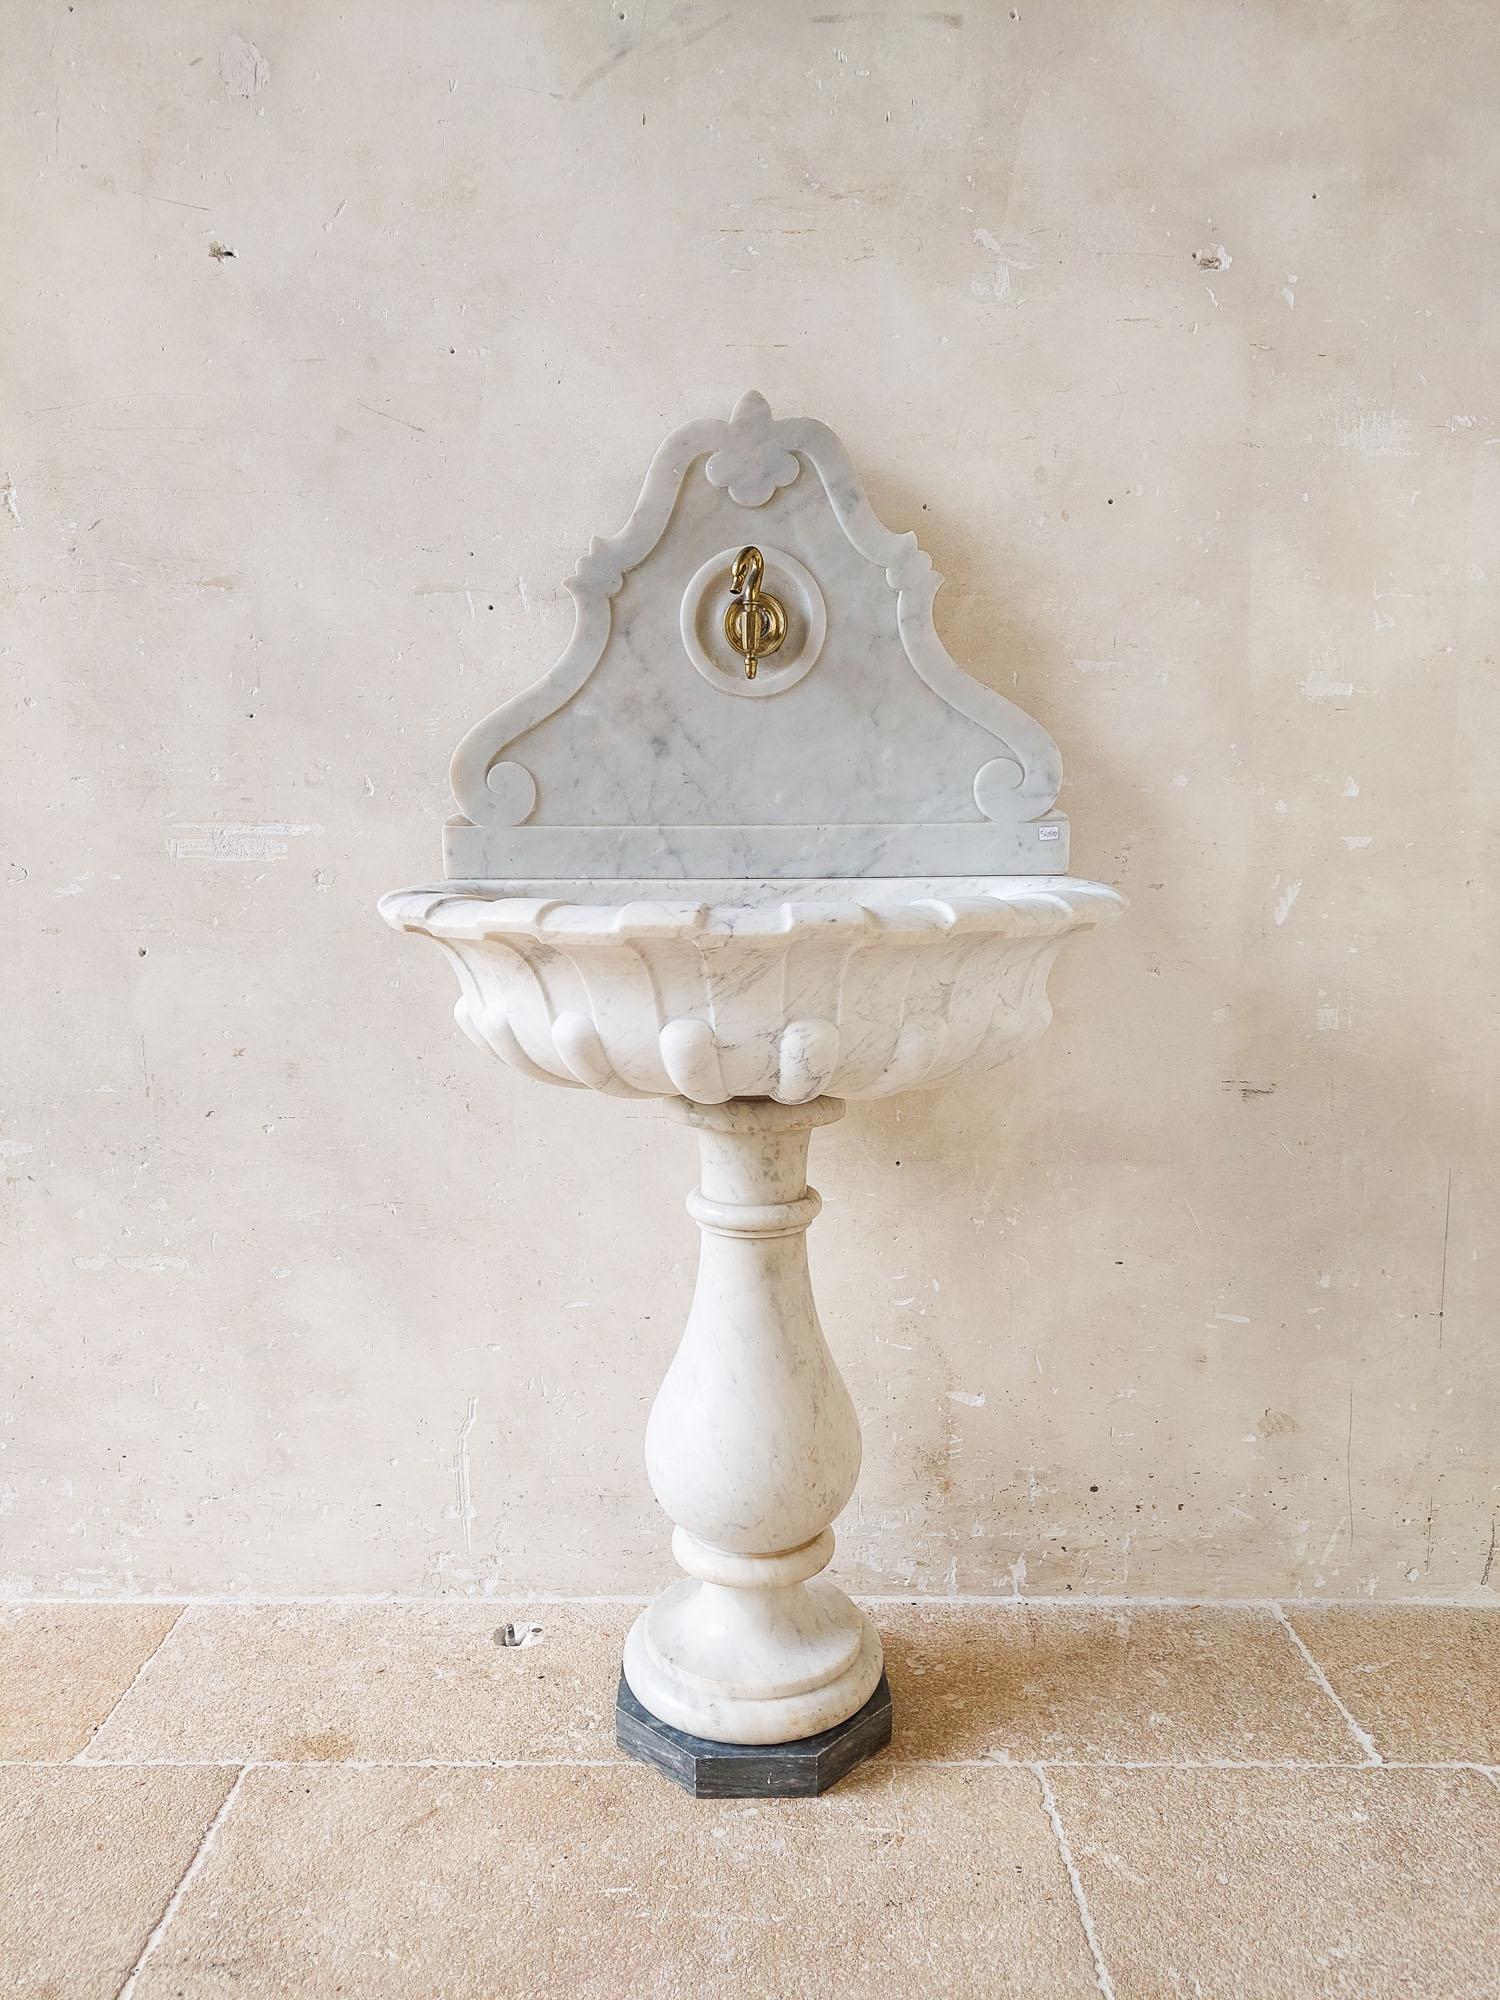 Antique French marble wall fountain, ± 1770. Beautiful Carrara marble wall fountain with marble wall plate behind the lobed bowl-shaped sink, on baluster base with Bardiglio marble base.

dimensions: h 125 x w 65 x d 51 cm
sink height: 79